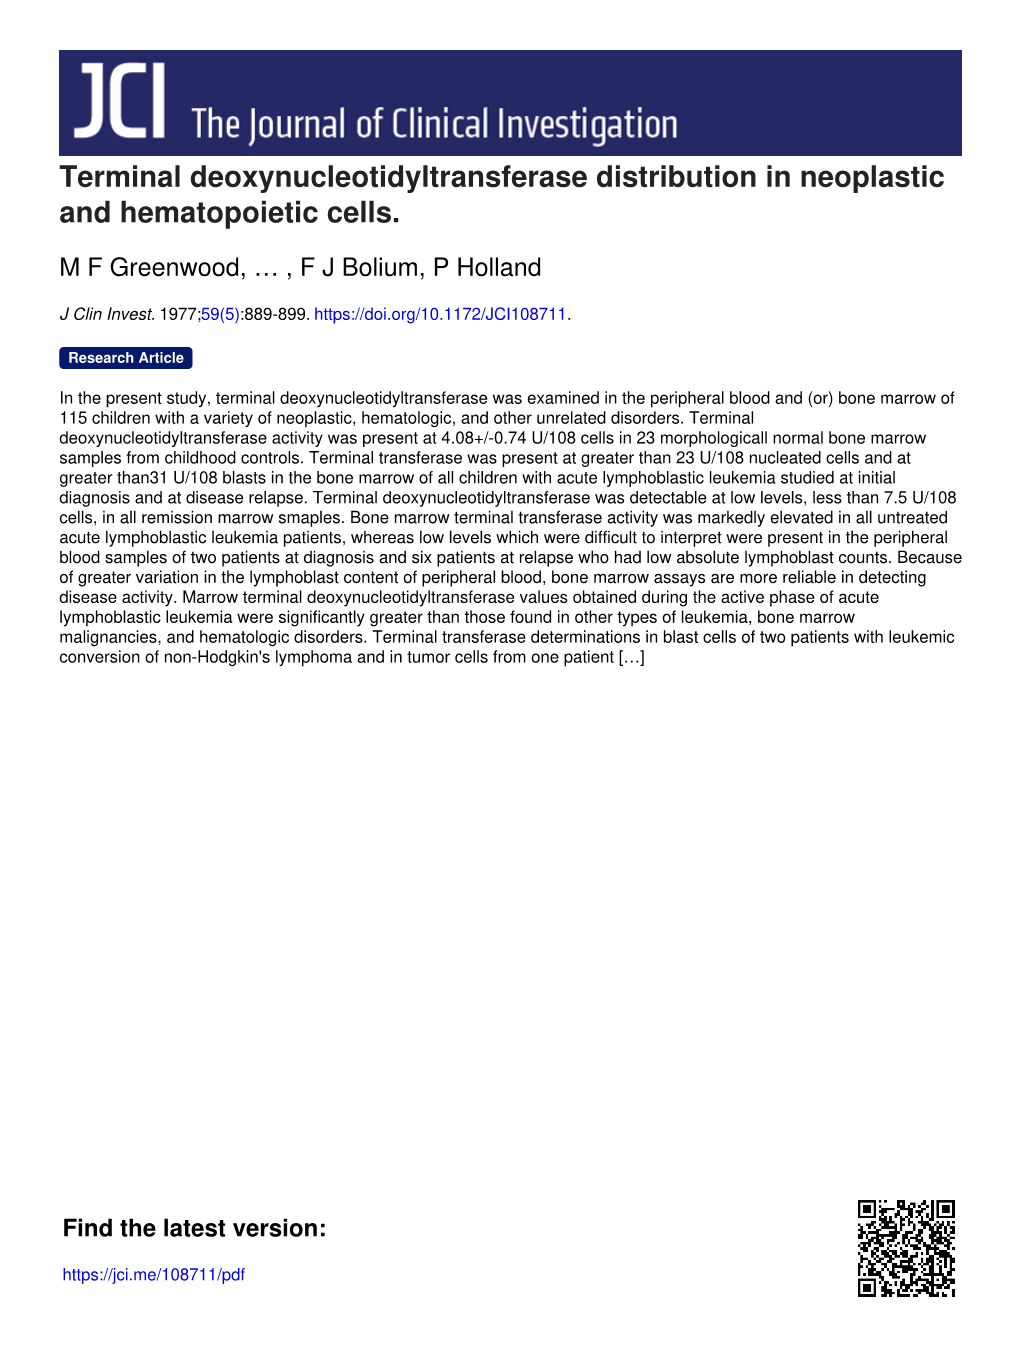 Terminal Deoxynucleotidyltransferase Distribution in Neoplastic and Hematopoietic Cells